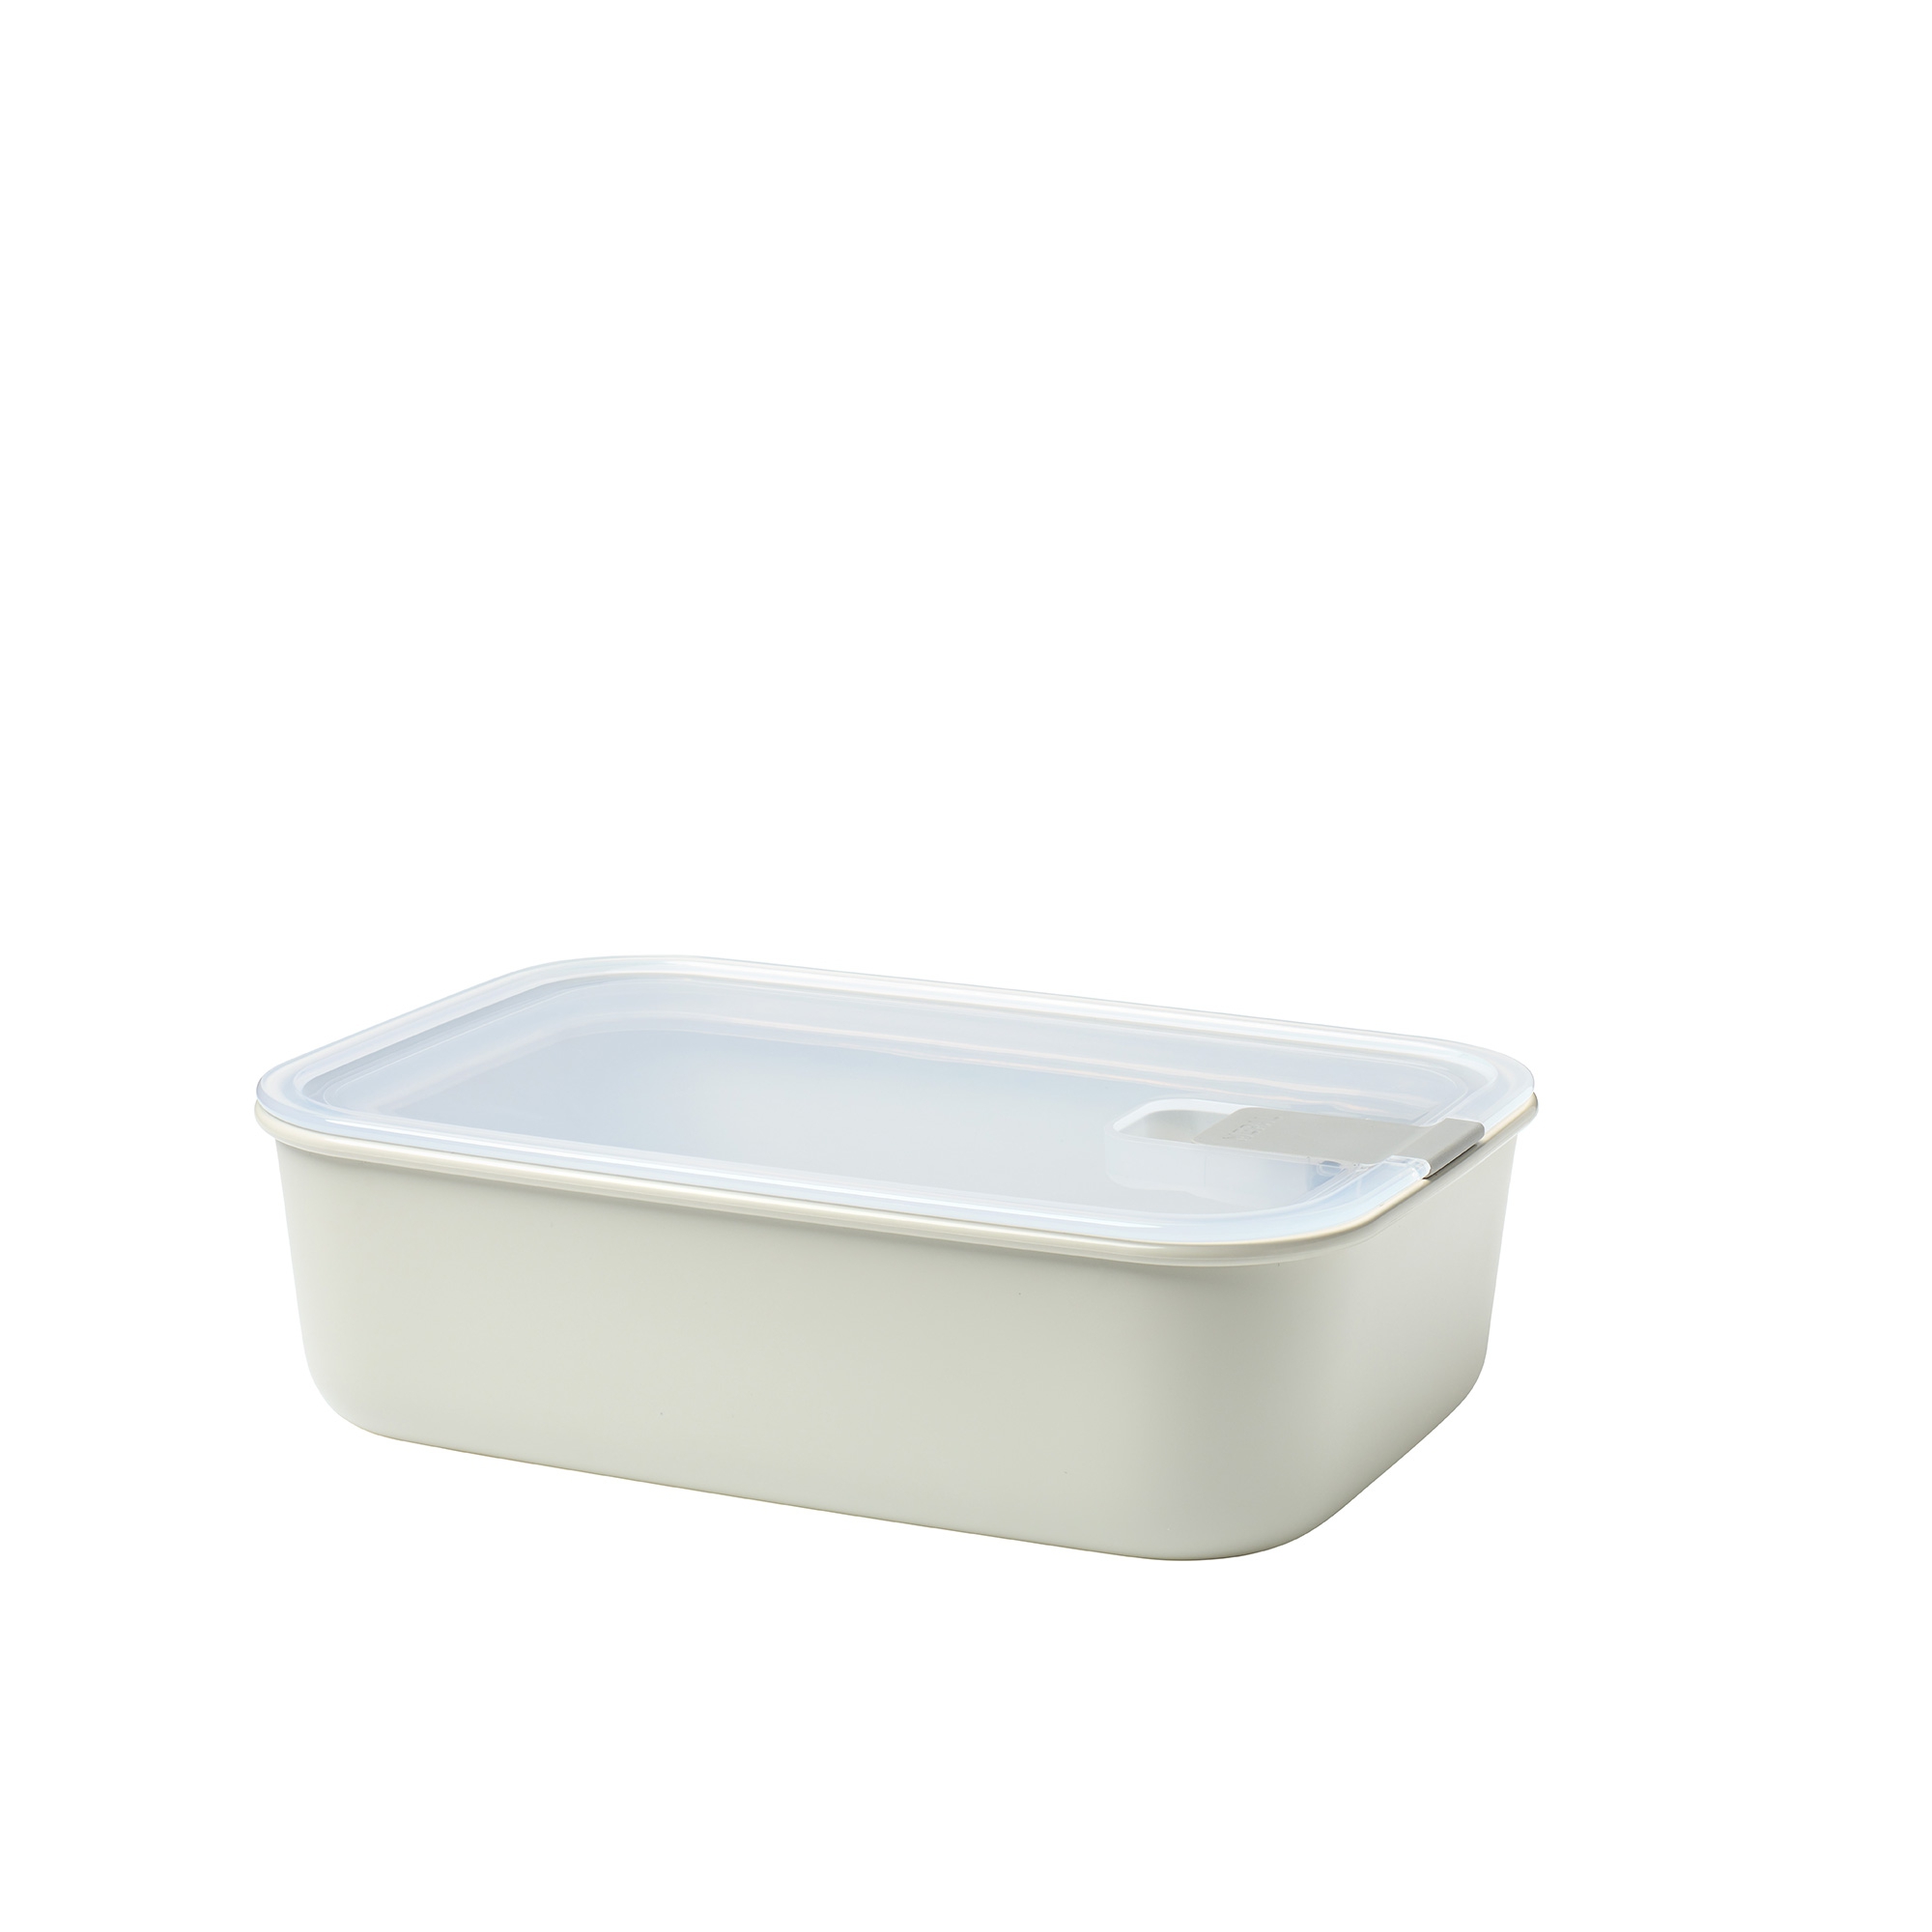 Heavy Duty Plastic Containers with Lids 12 EA Mix of Sizes 60 Containers  Total. Leakproof Microwavable Portion Cup for To-Go Orders, Food Prep or